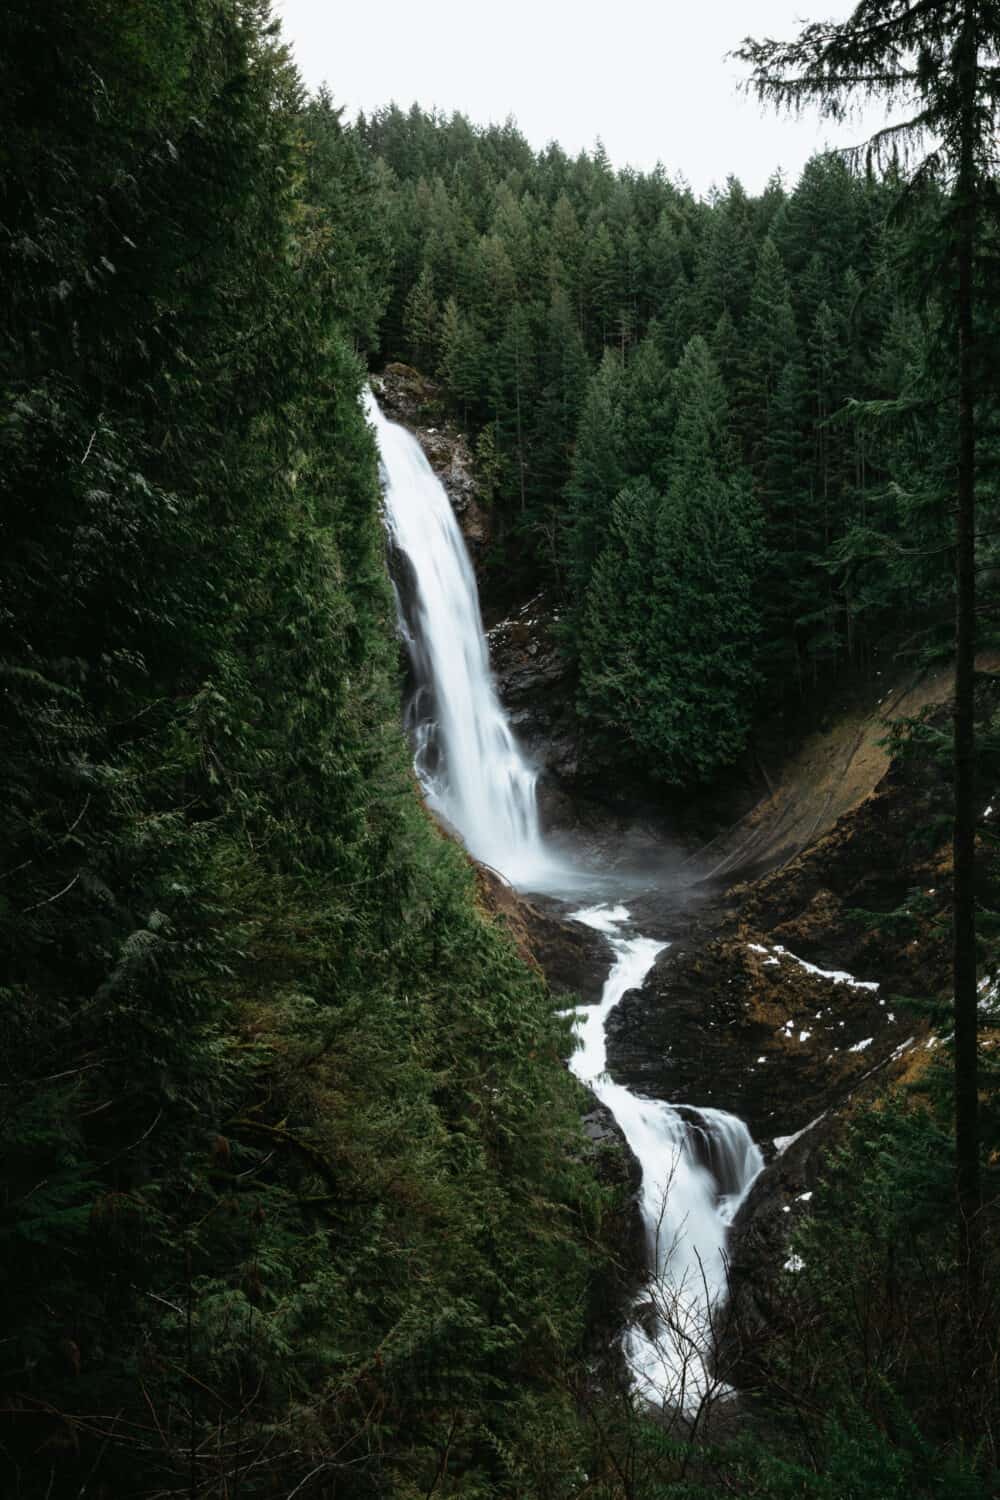 Best Hikes In Washington - Wallace Falls Trail